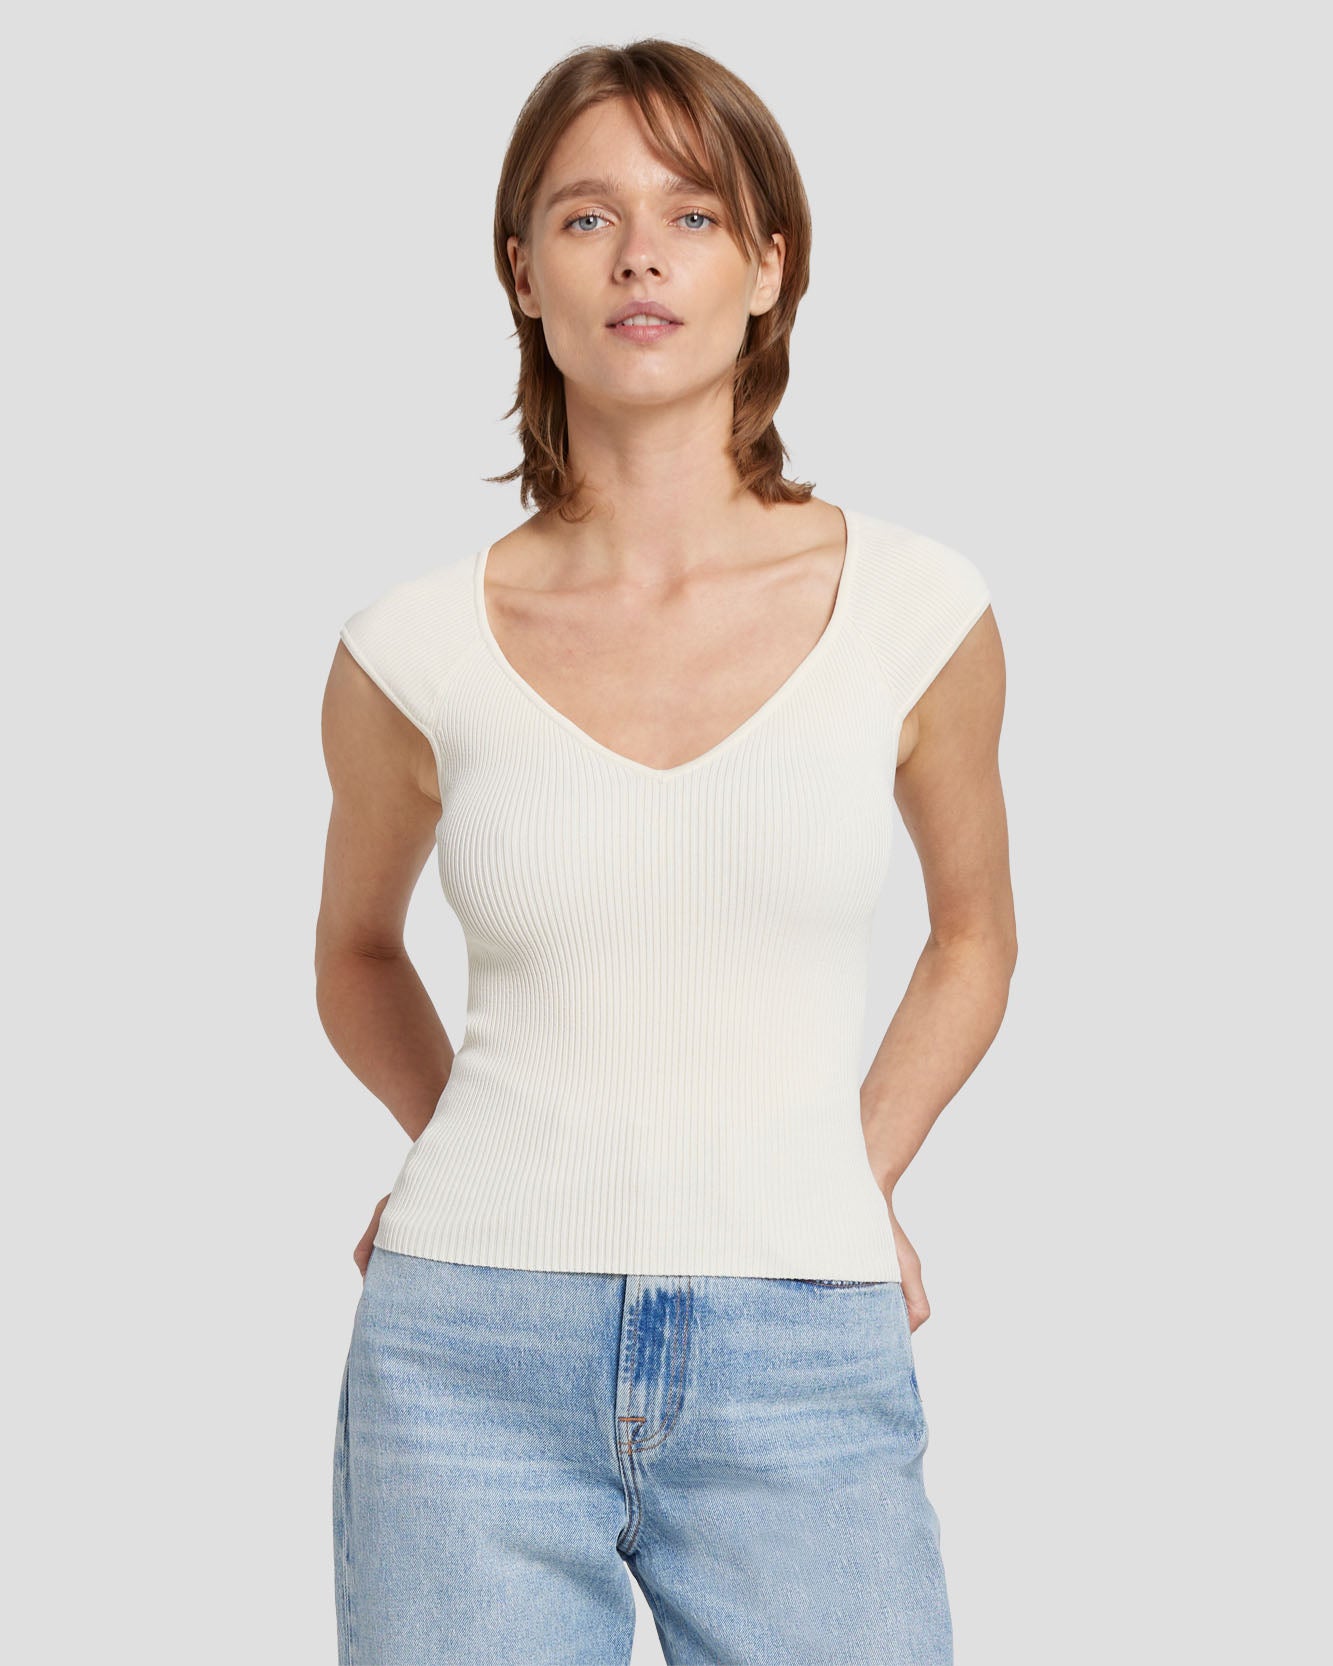 7 For All Mankind Sweetheart Rib Top in Cream 7N119D35CRM